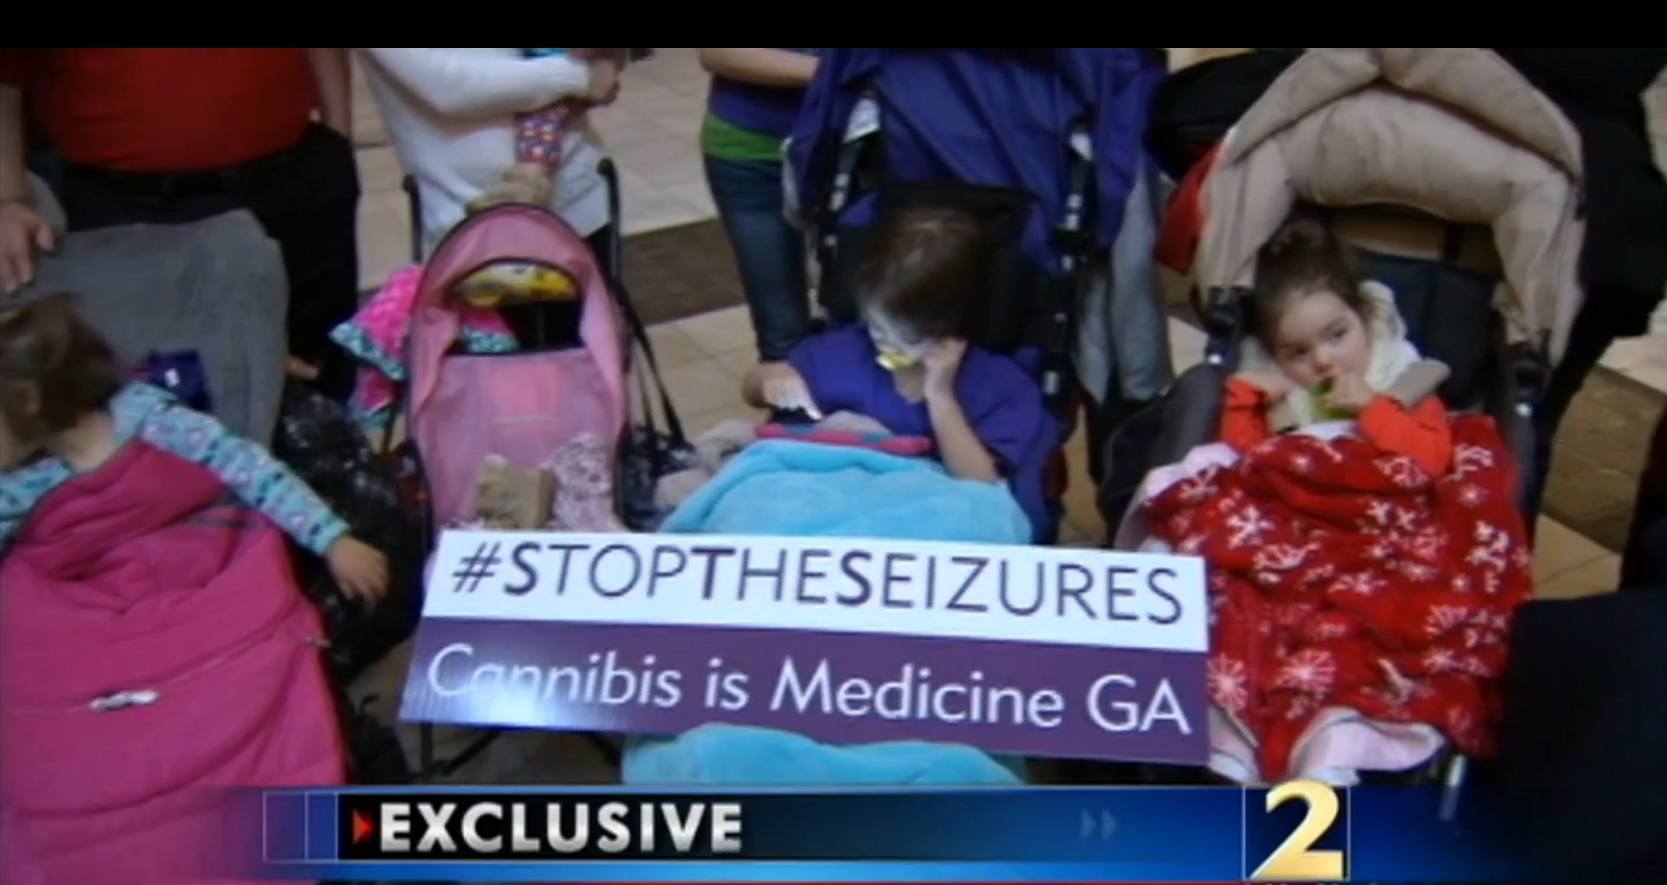 Image of sick kids in Georgia that will be able to legally get medical cannabis when cards are issued